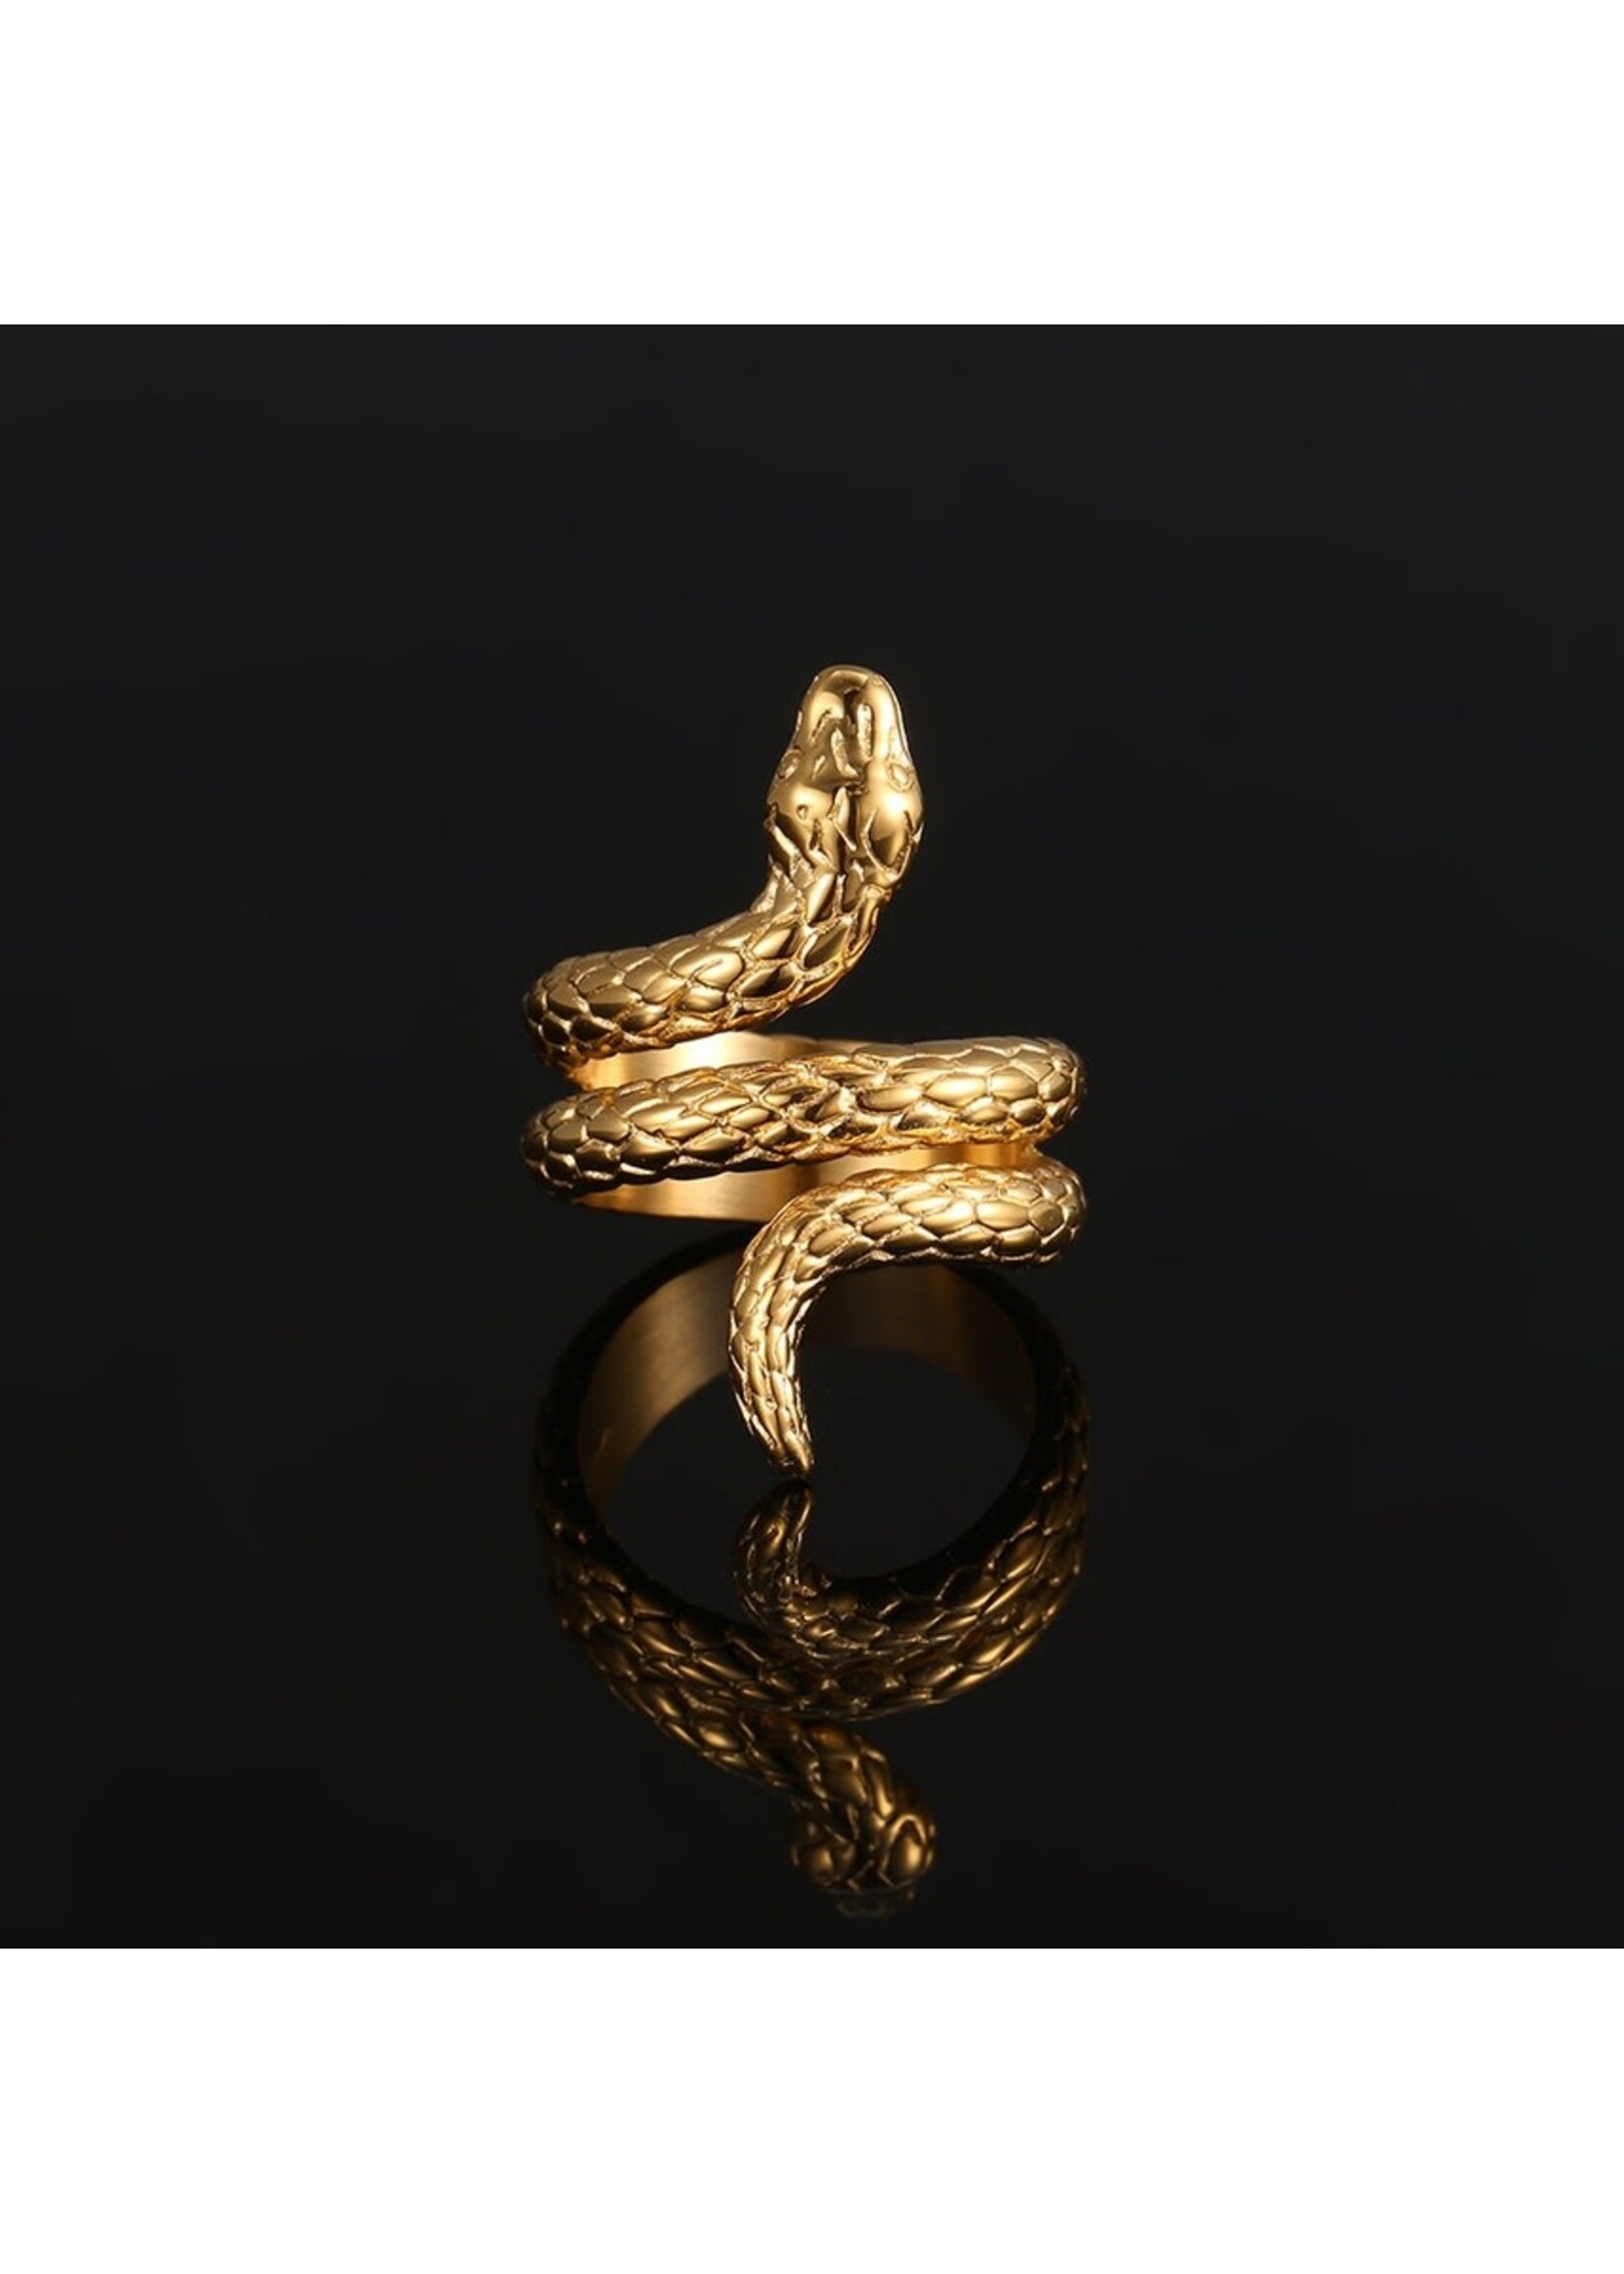 Gold Tremendous Snake Ring, Gold Serpent Statement Ring,'' Ofis '' Handmade  BRASS Metal Gold-plated 18K - Etsy | Snake ring gold, Snake ring, Unique  ear piercings